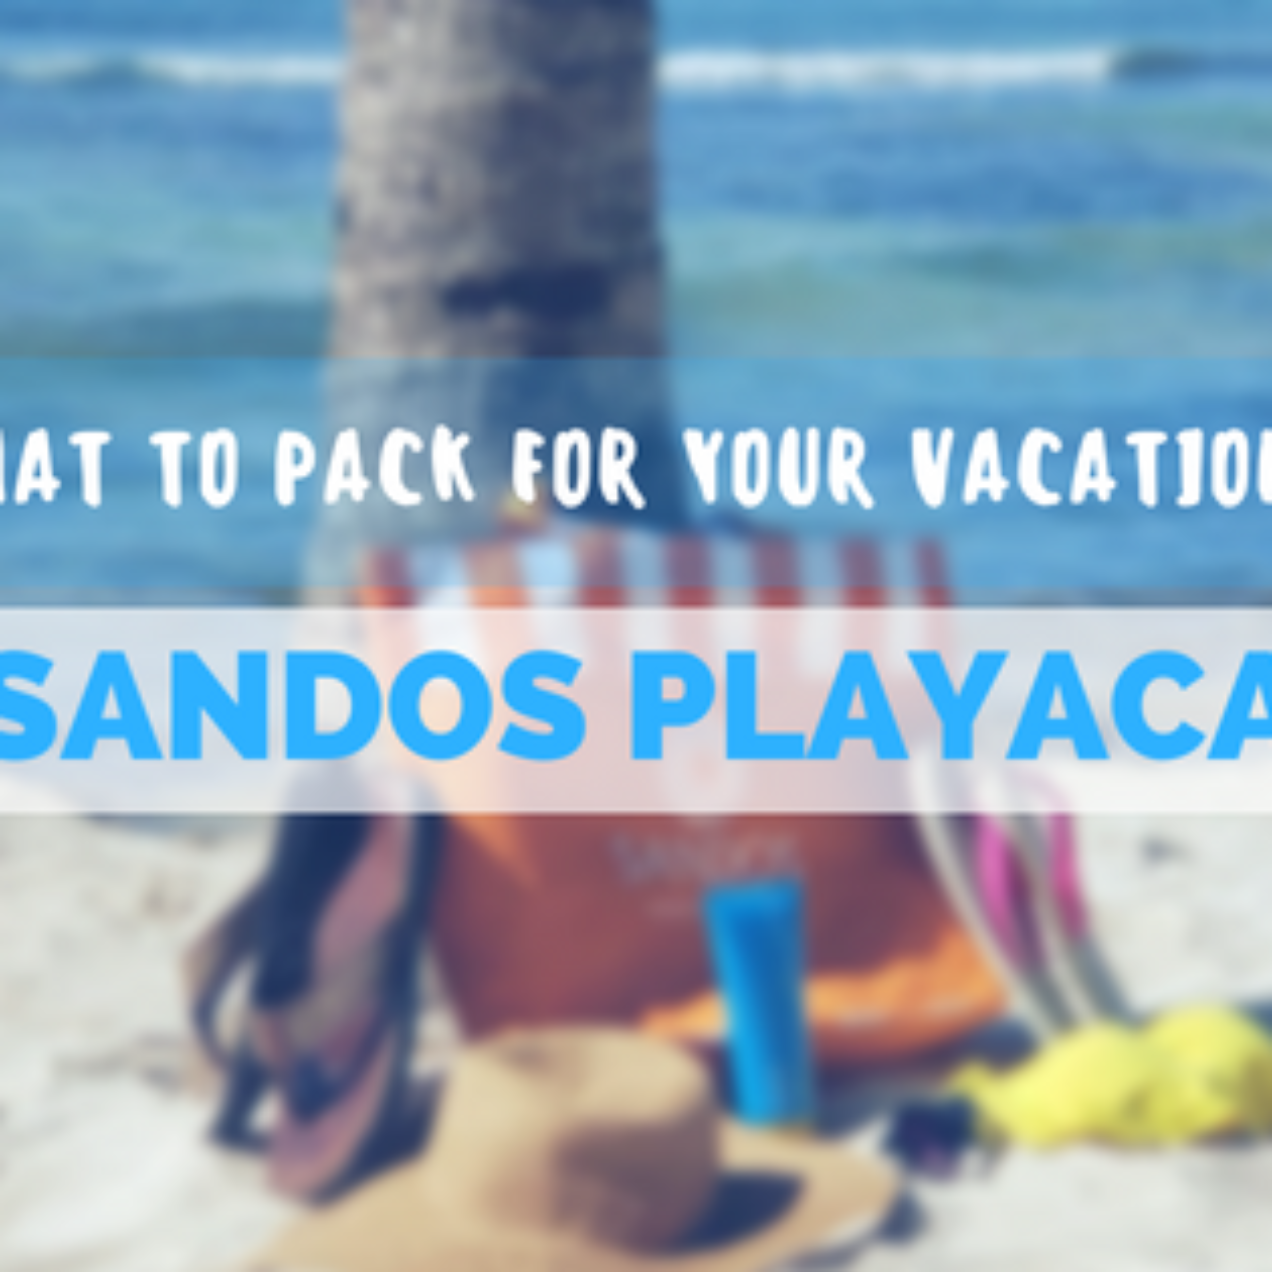 What to Pack for a Beach Vacation at Sandos Playacar